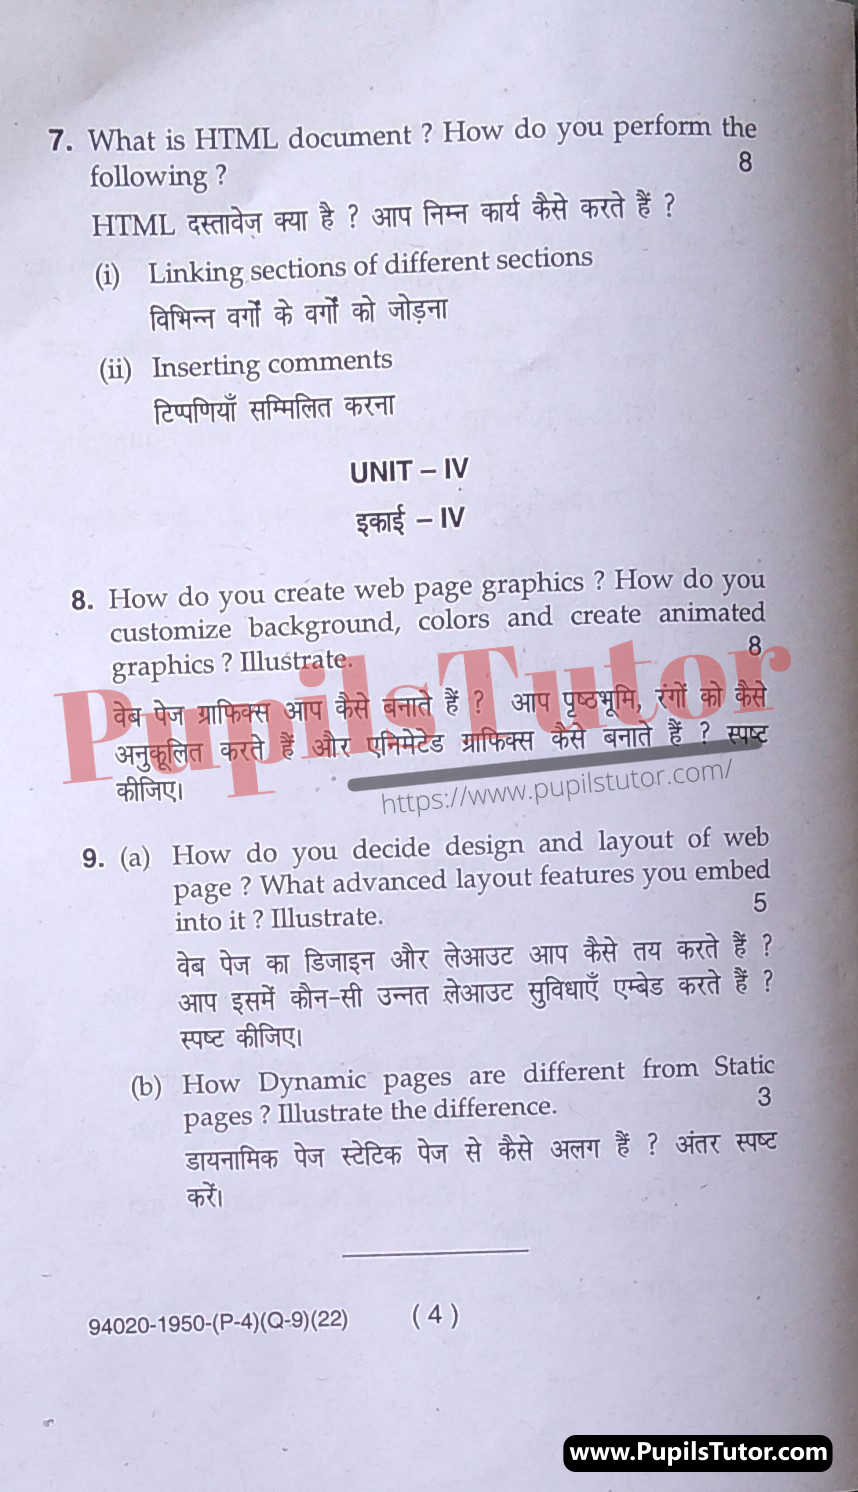 MDU (Maharshi Dayanand University, Rohtak Haryana) Pass Course (B.Sc. [Computer Science] – Bachelor of Science) Introduction To Internet And Web Technologies Important Questions Of February, 2022 Exam PDF Download Free (Page 4)